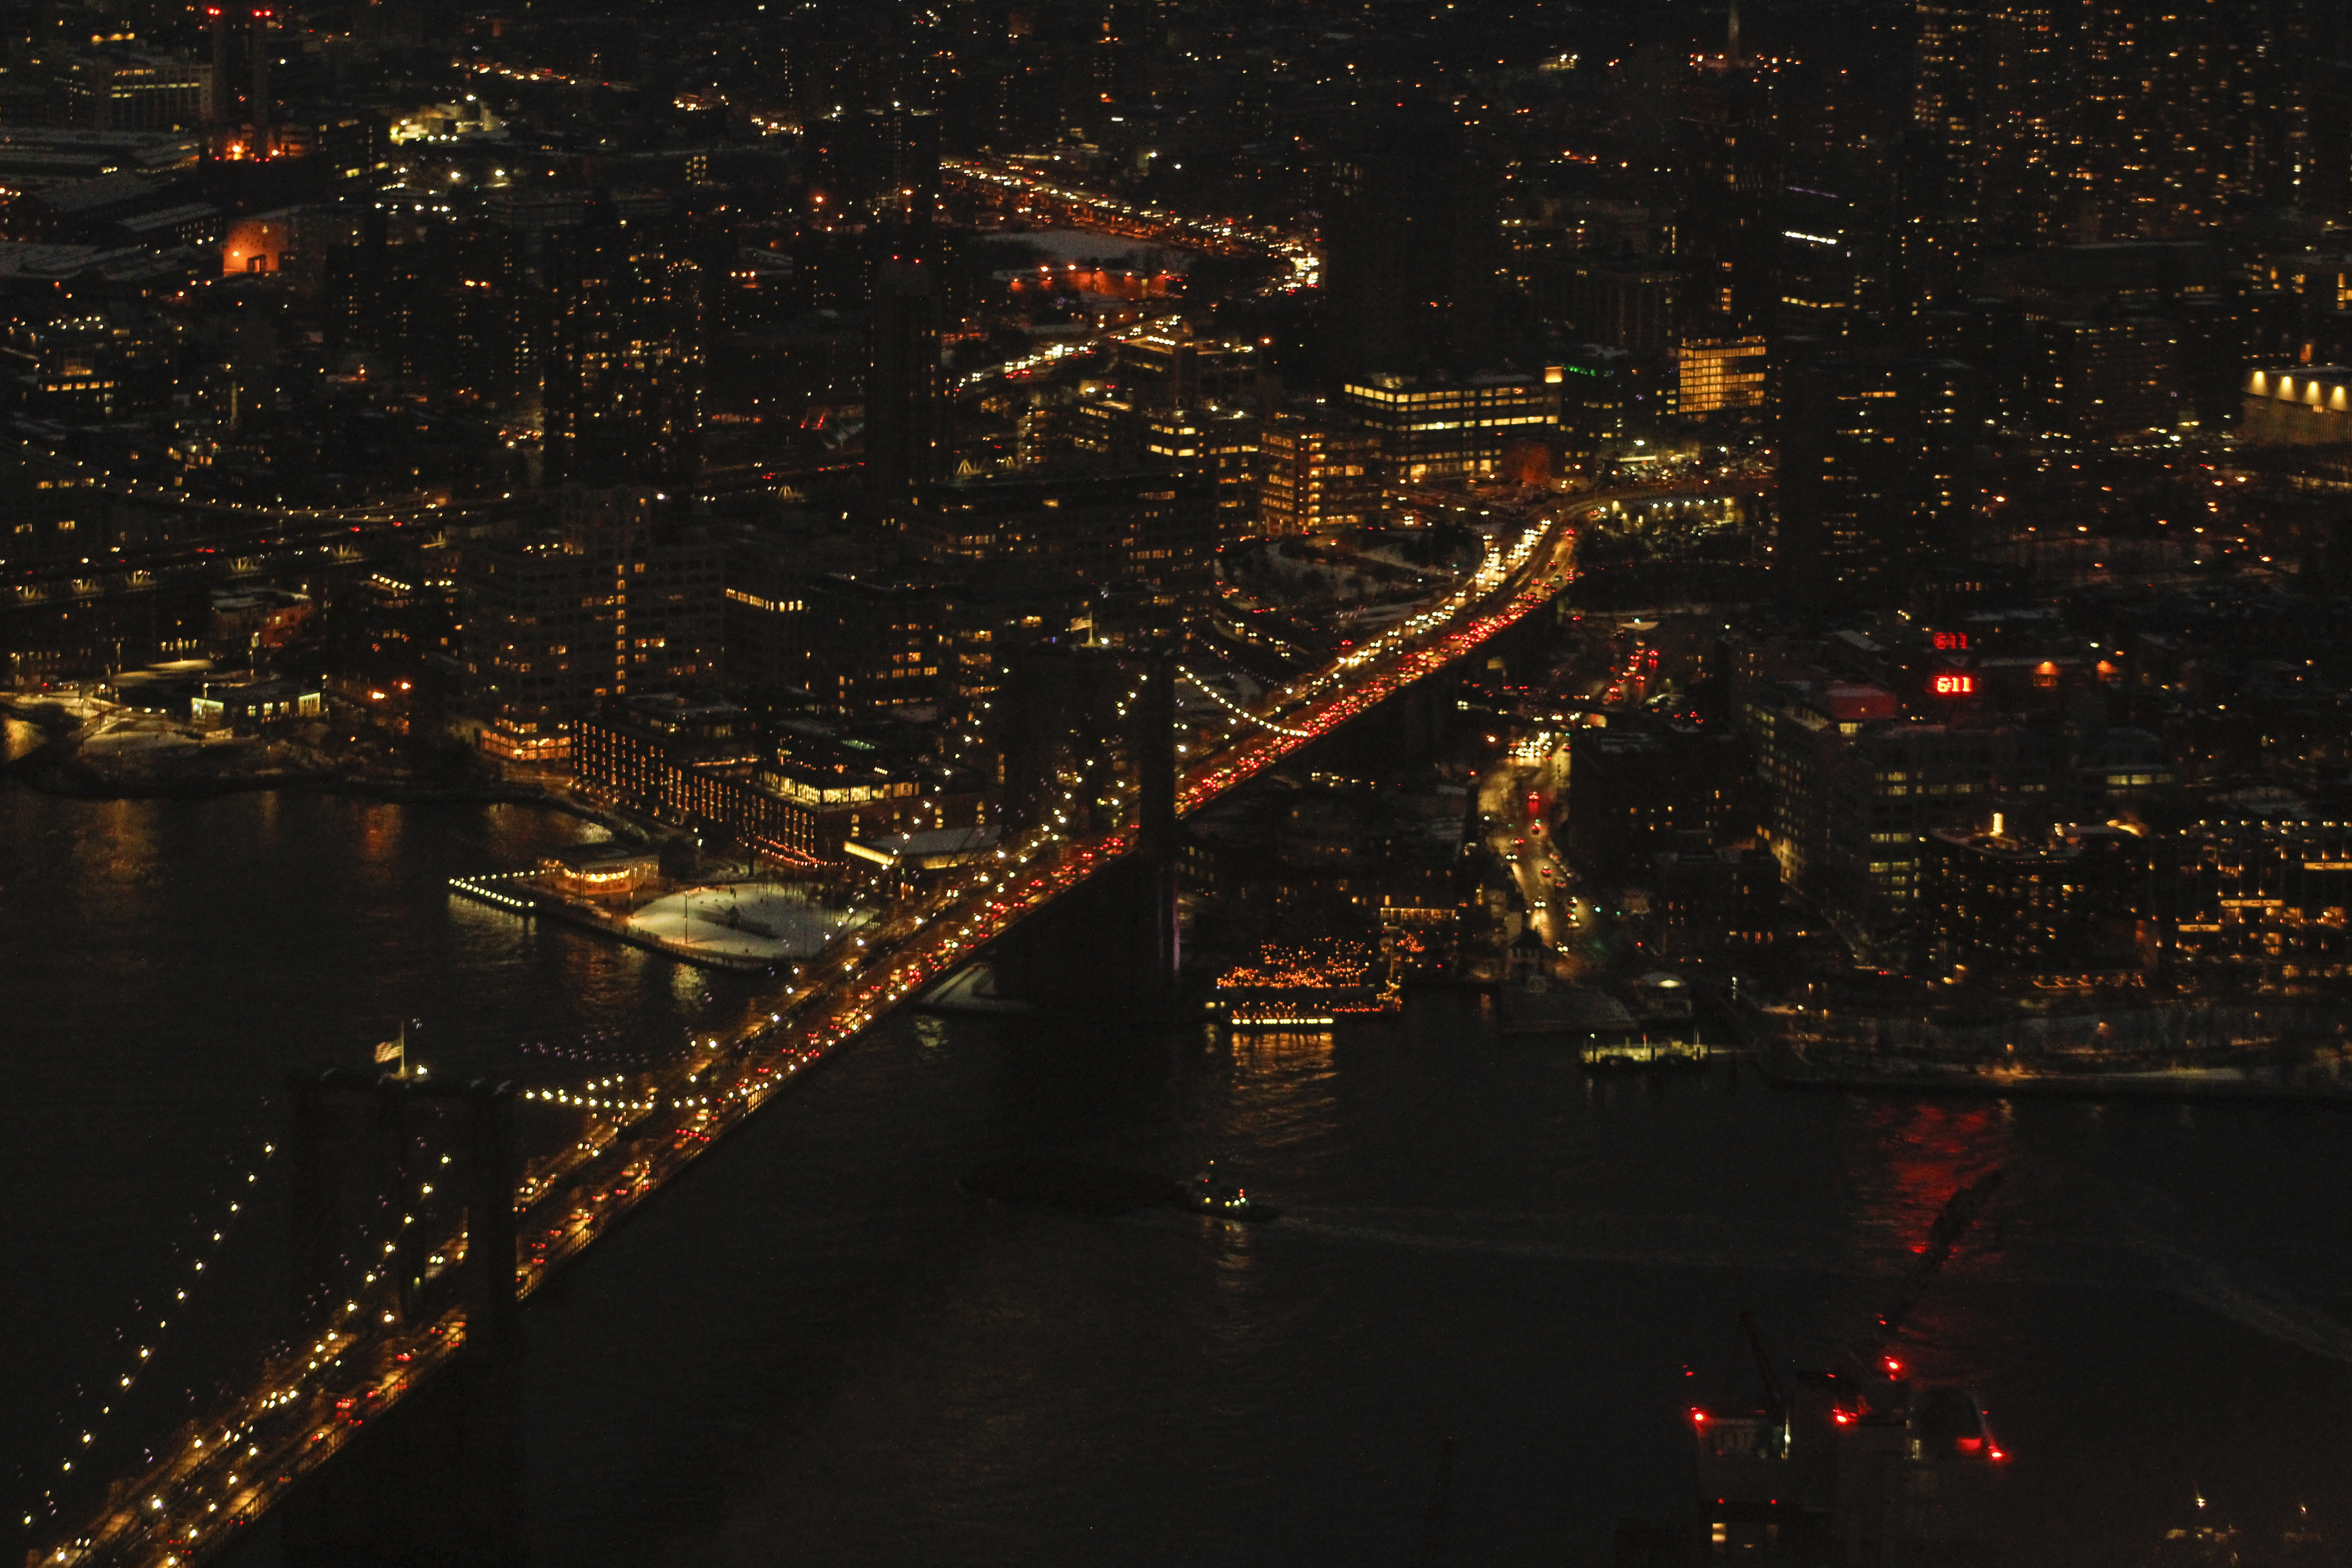 The Brooklyn Bridge taken from the top of the World Trade Center.